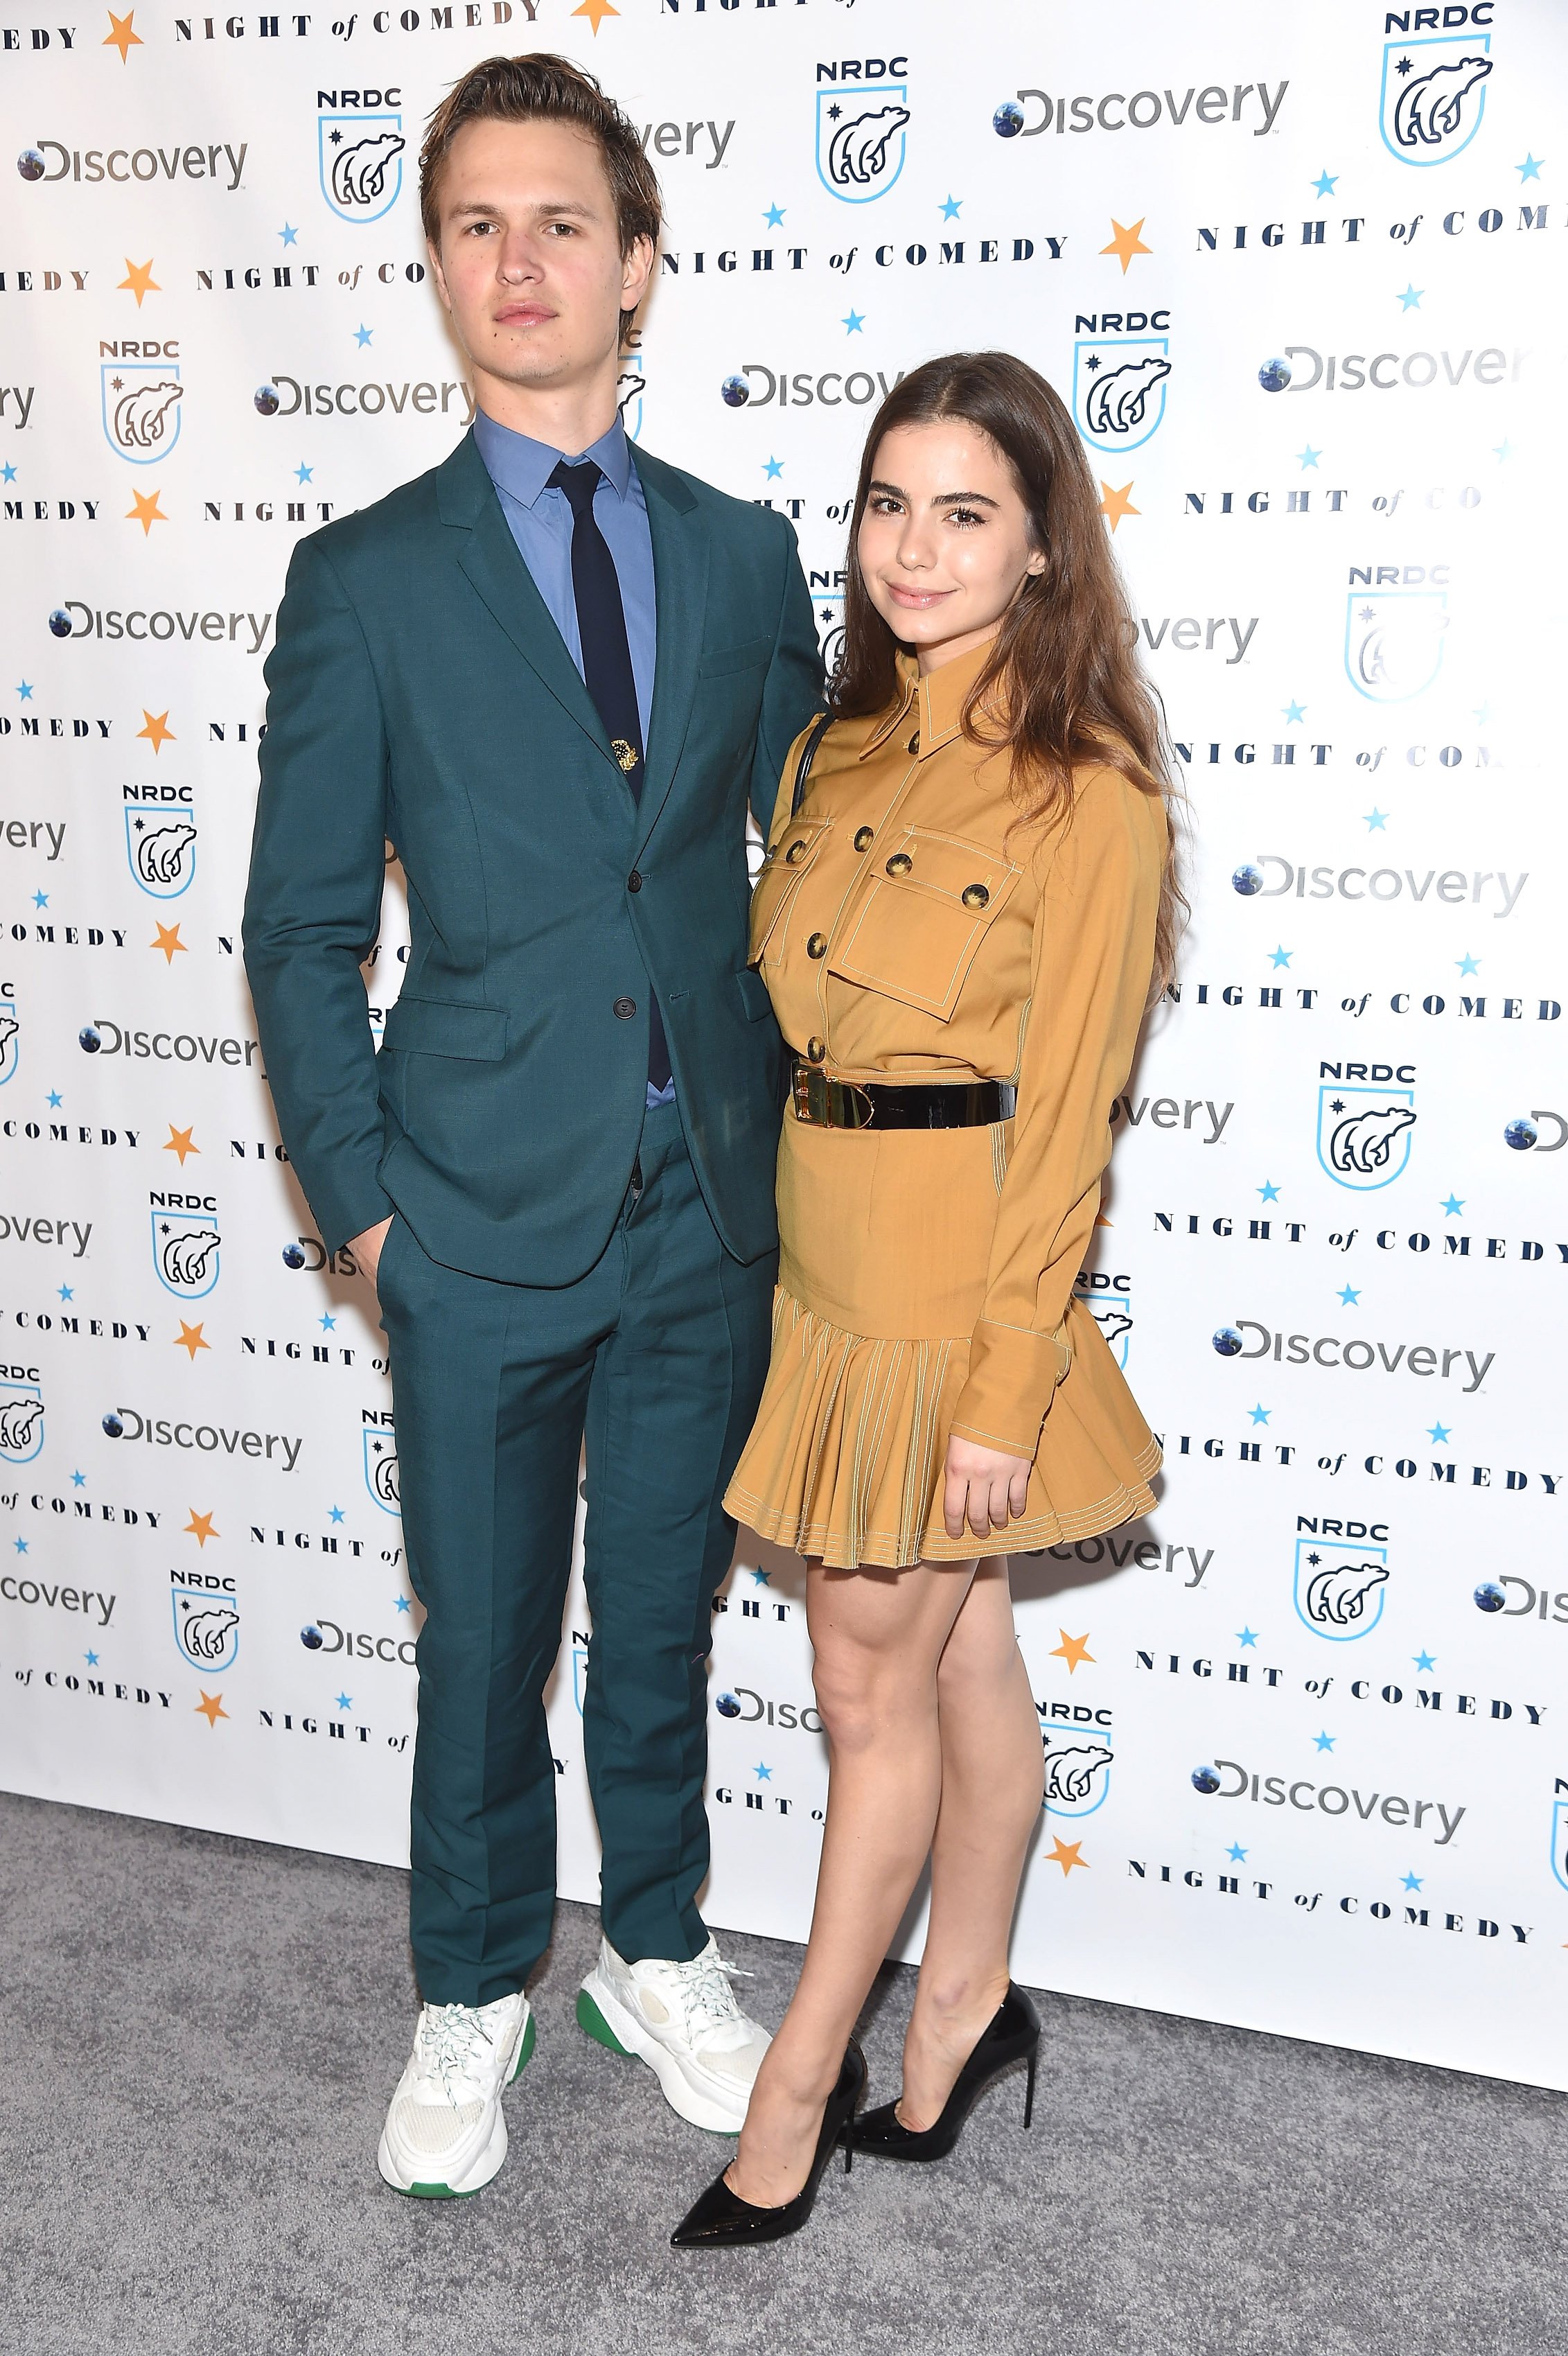 Actor Ansel Elgort and Violetta Komyshan attend the NRDC's 'Night of Comedy' benefit at New York Historical Society on April 30, 2019, in New York City. | Source: Getty Images